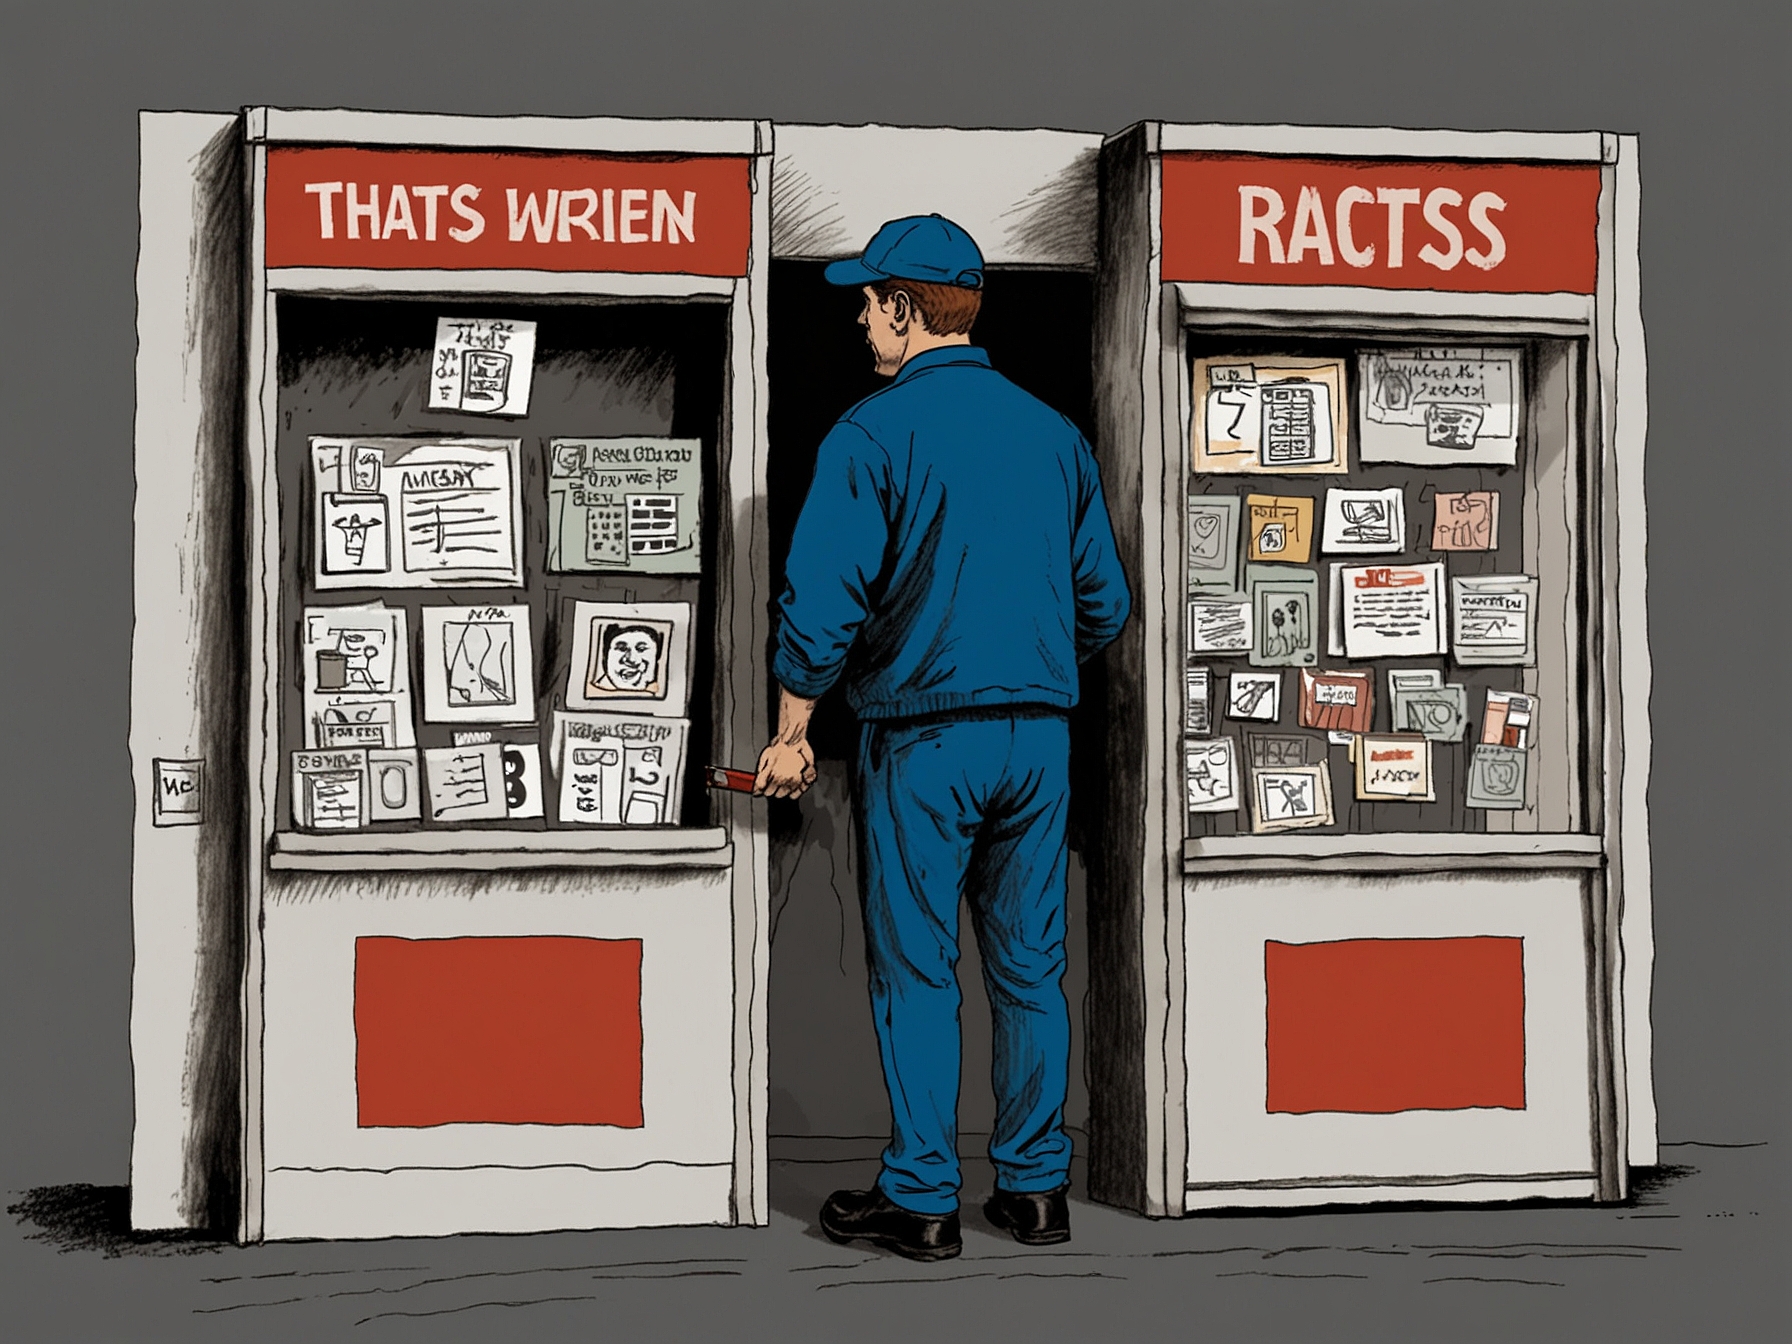 A postal worker caught on video writing 'racists' on Reform UK leaflets, raising questions about the impartiality and ethics of handling political materials.